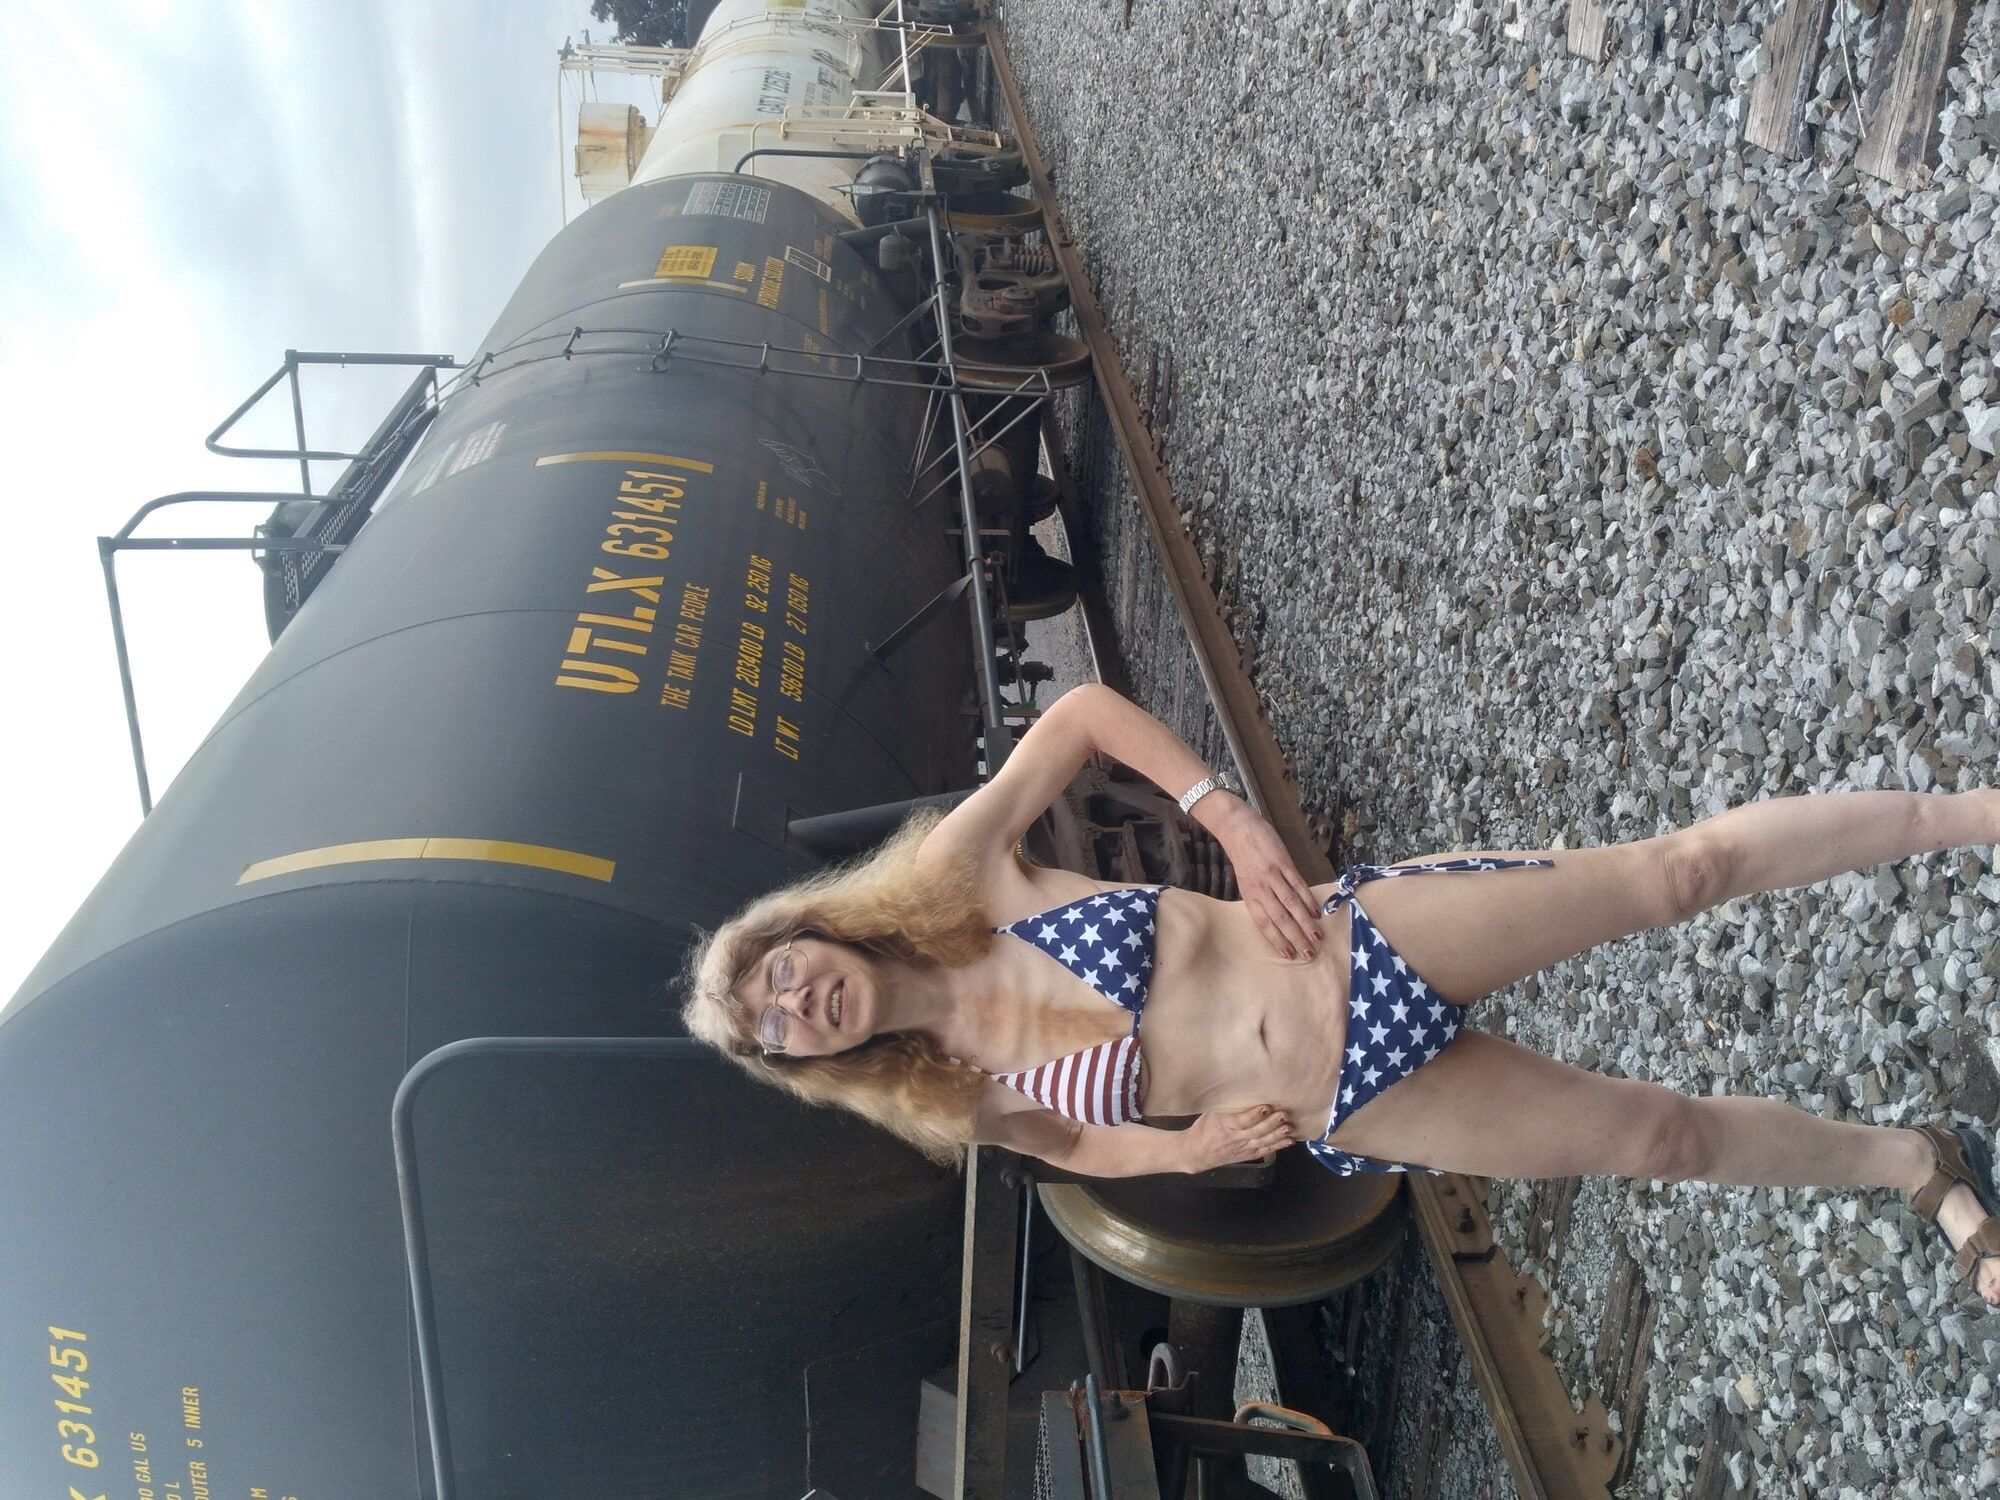 American Train. July 4th release. My best photo set to date. #23